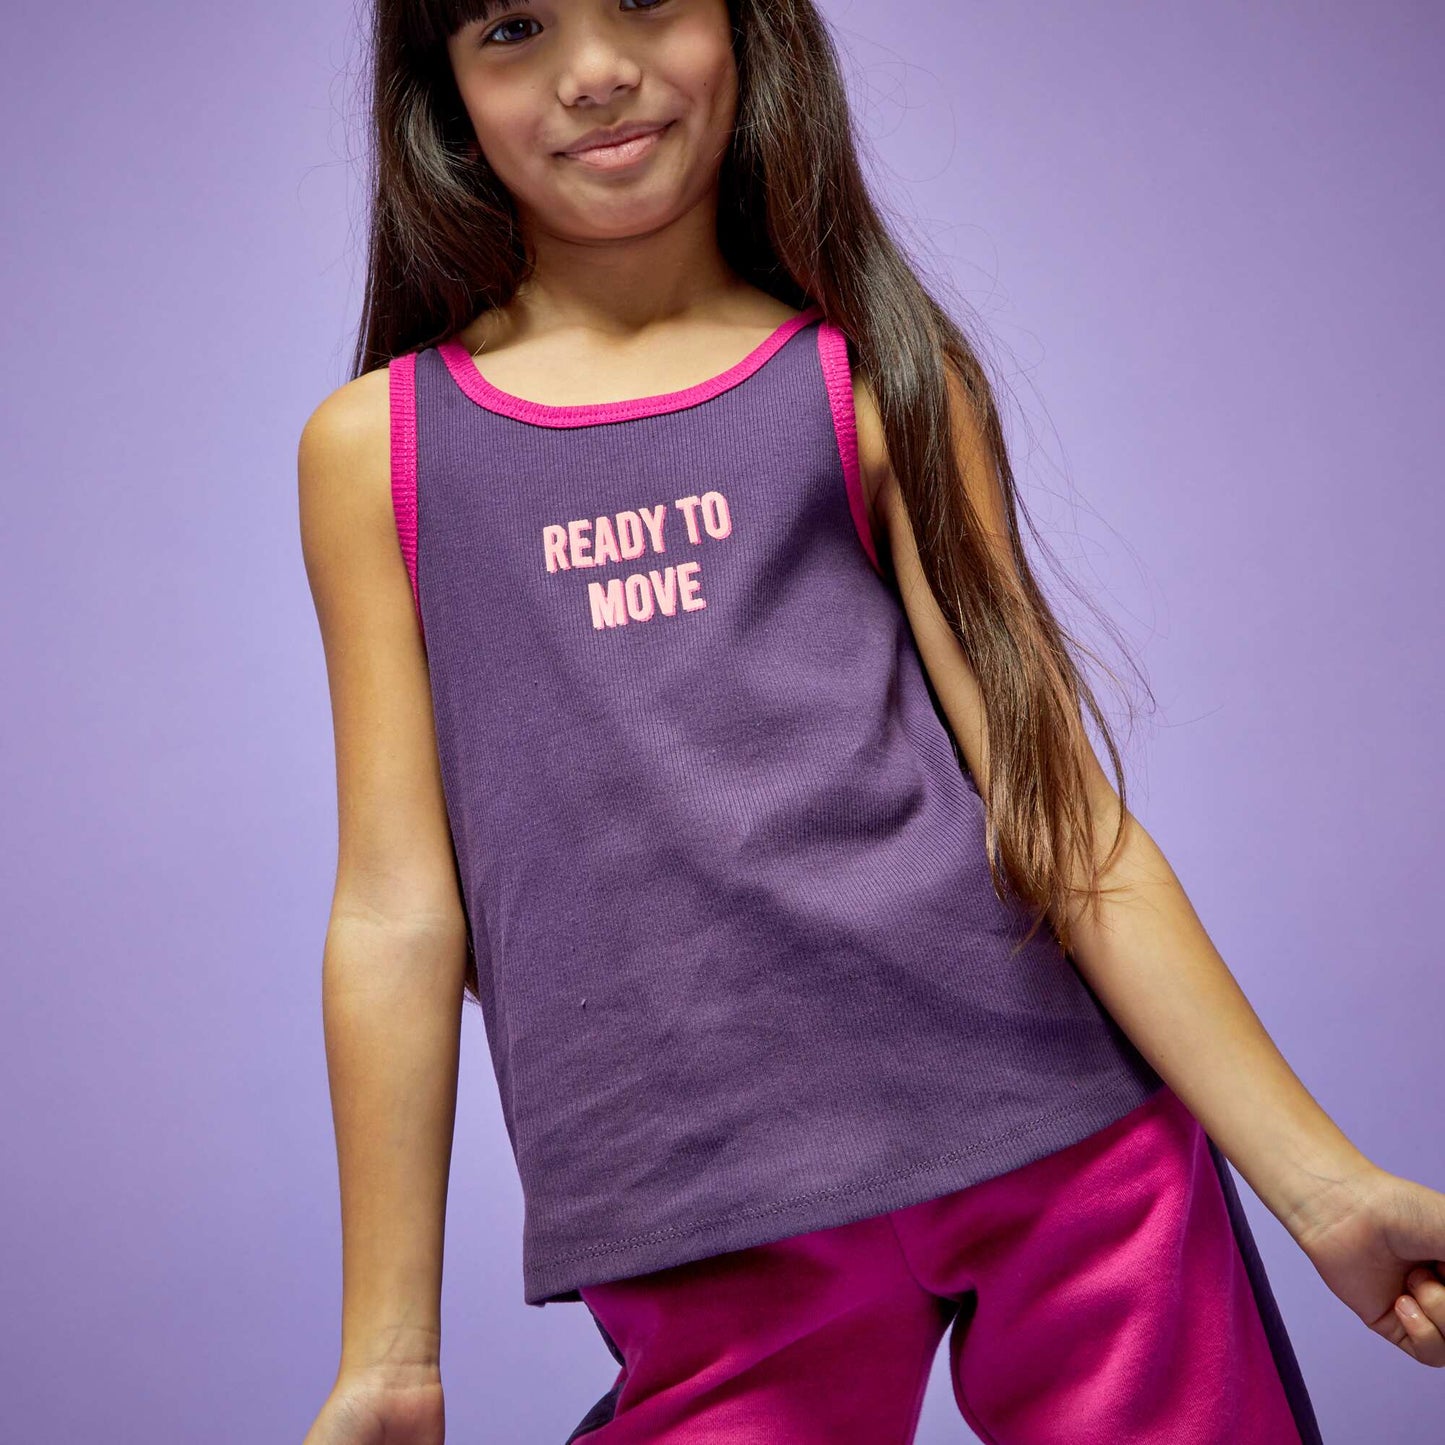 'Ready to move' vest top PINK